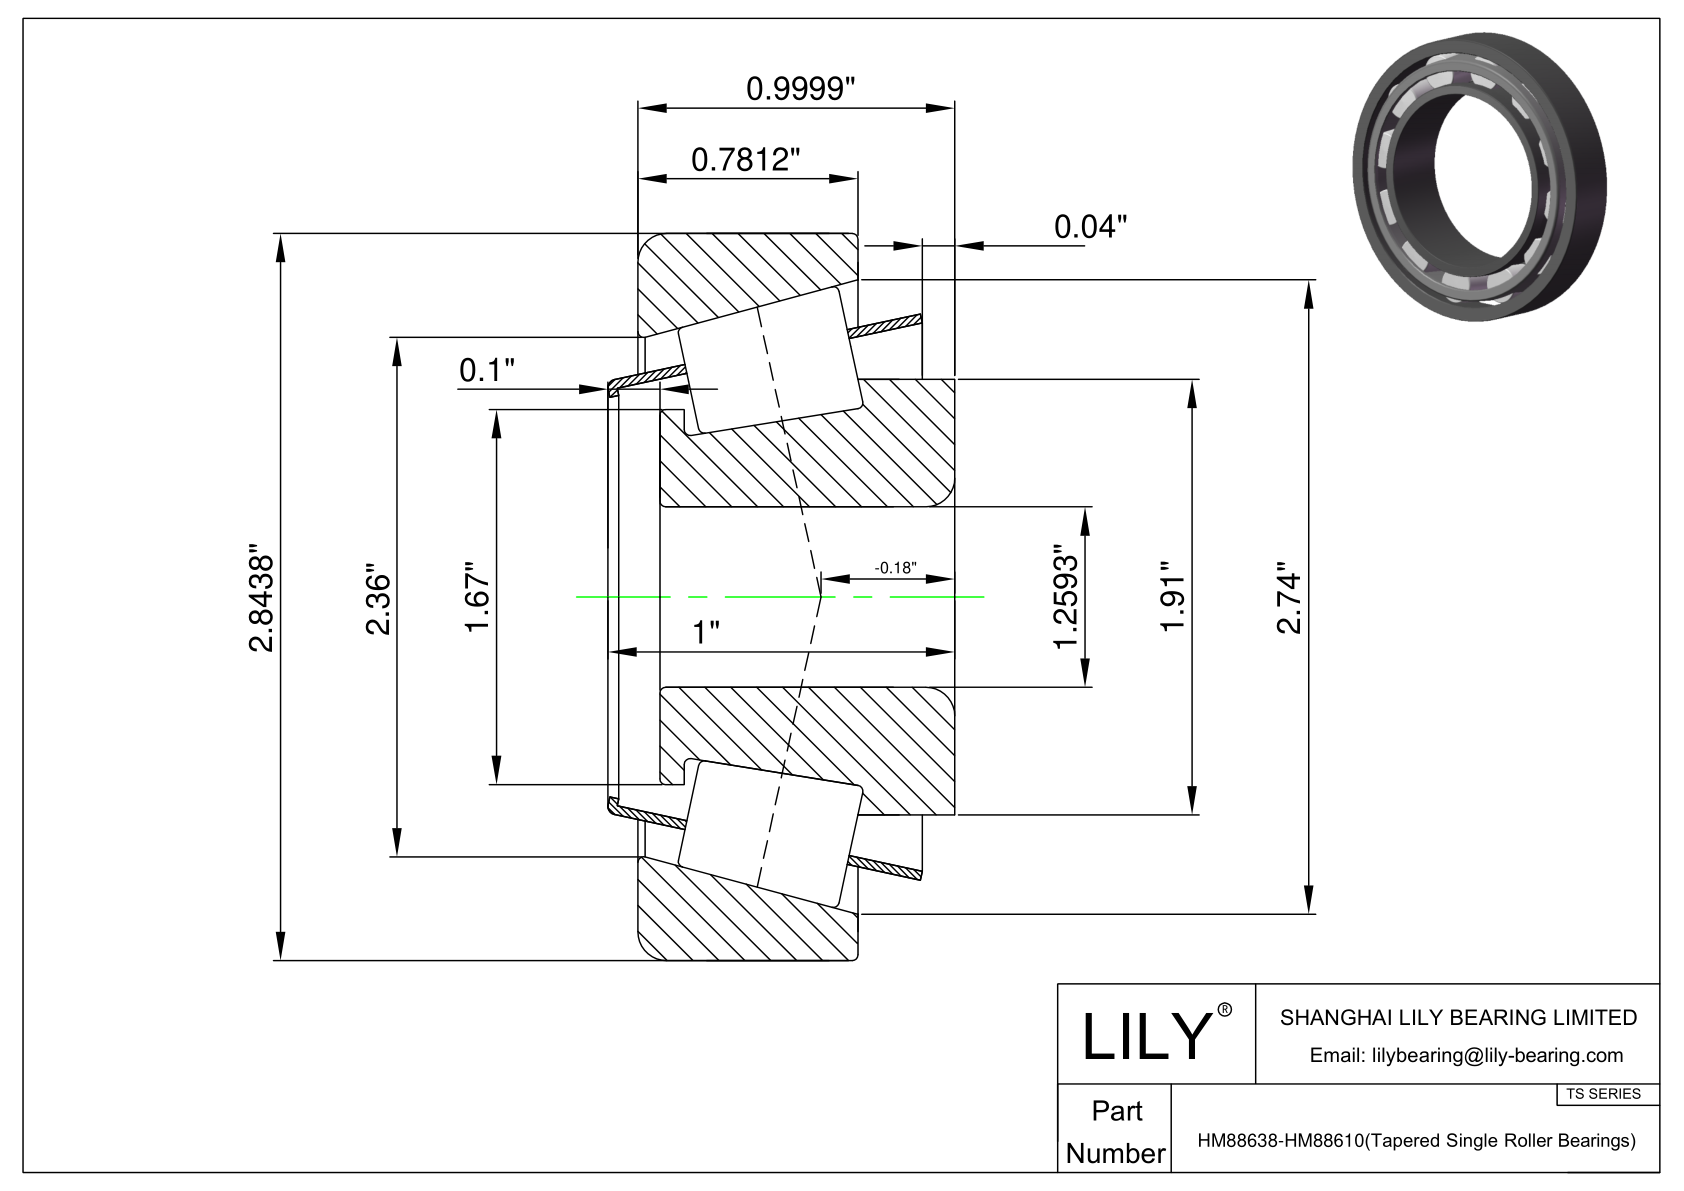 HM88638-HM88610 TS (Tapered Single Roller Bearings) (Imperial) cad drawing